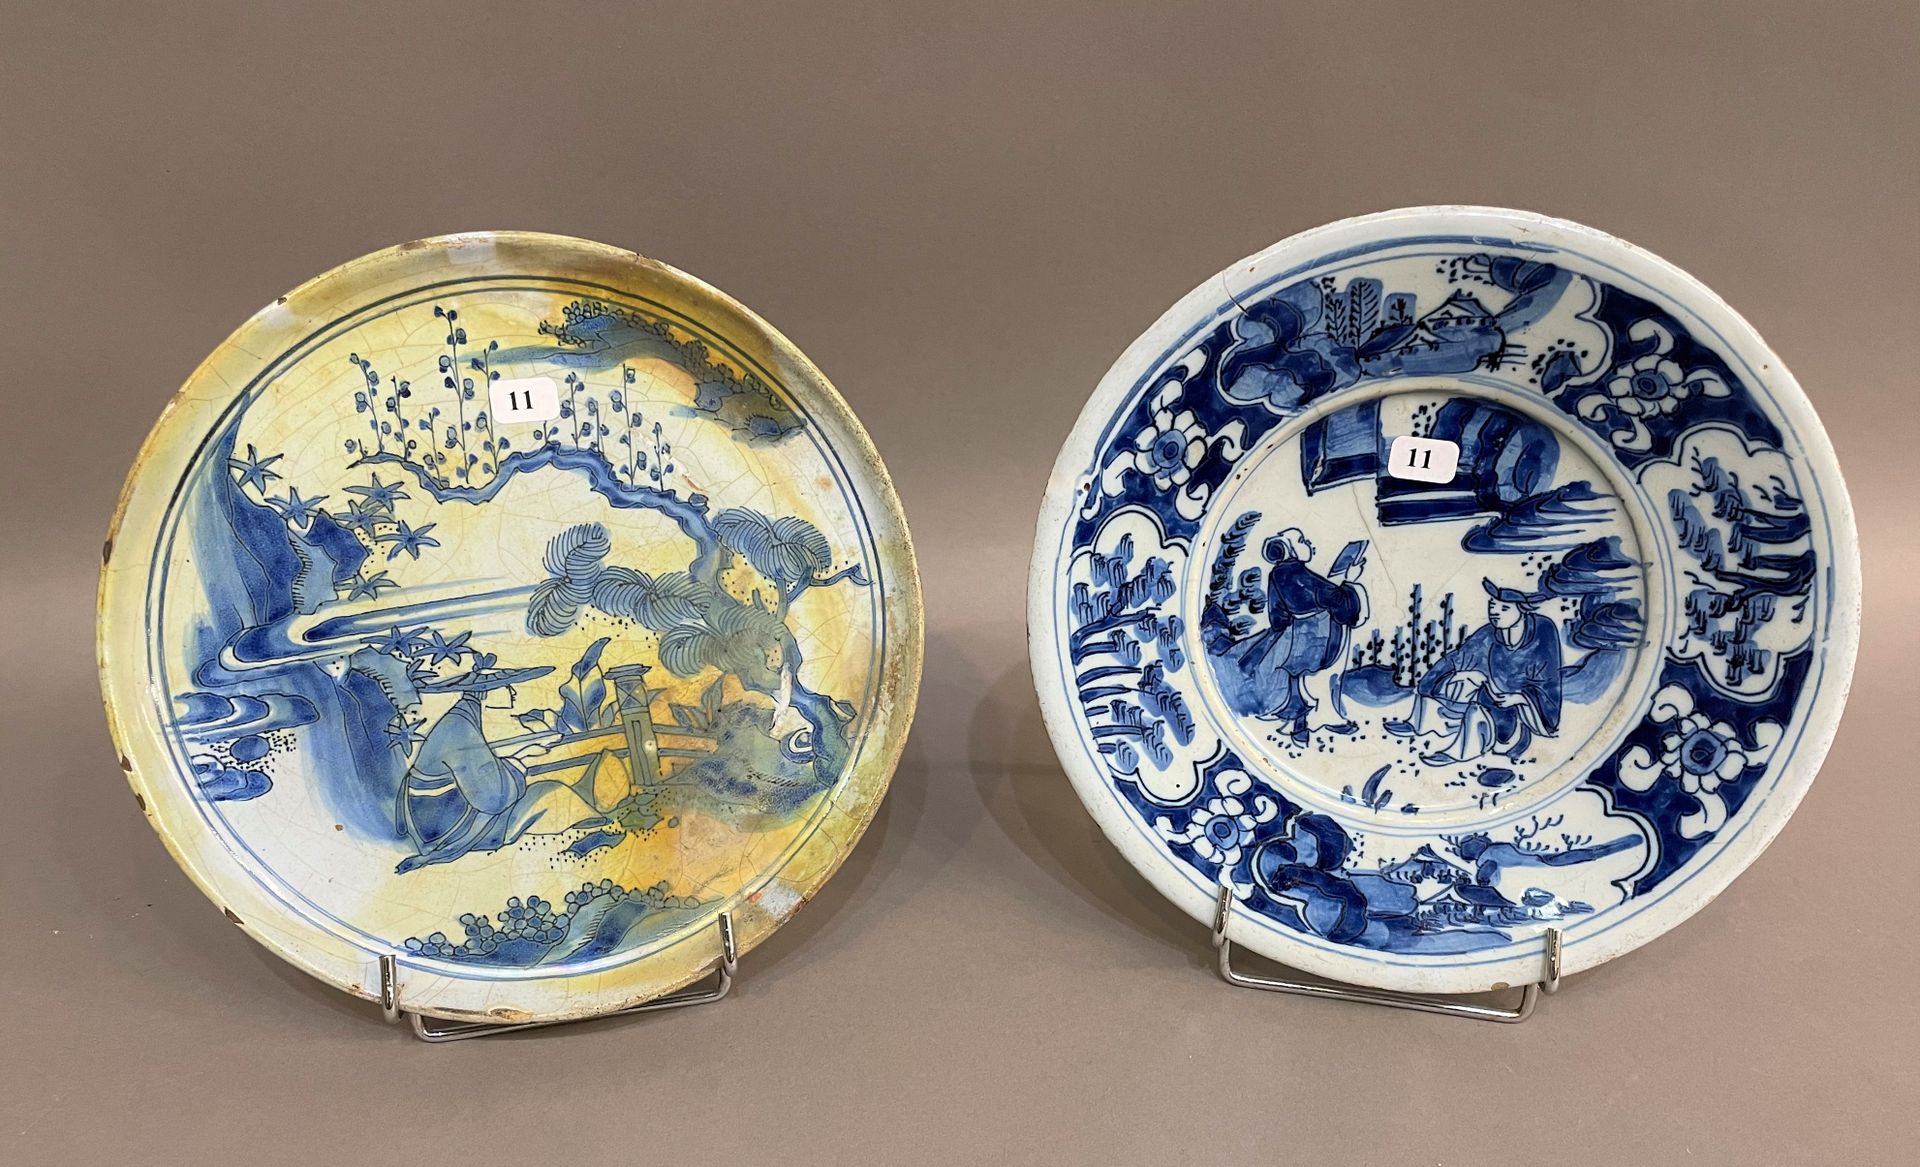 Null Nevers

2 round earthenware dishes decorated in blue monochrome with Chines&hellip;